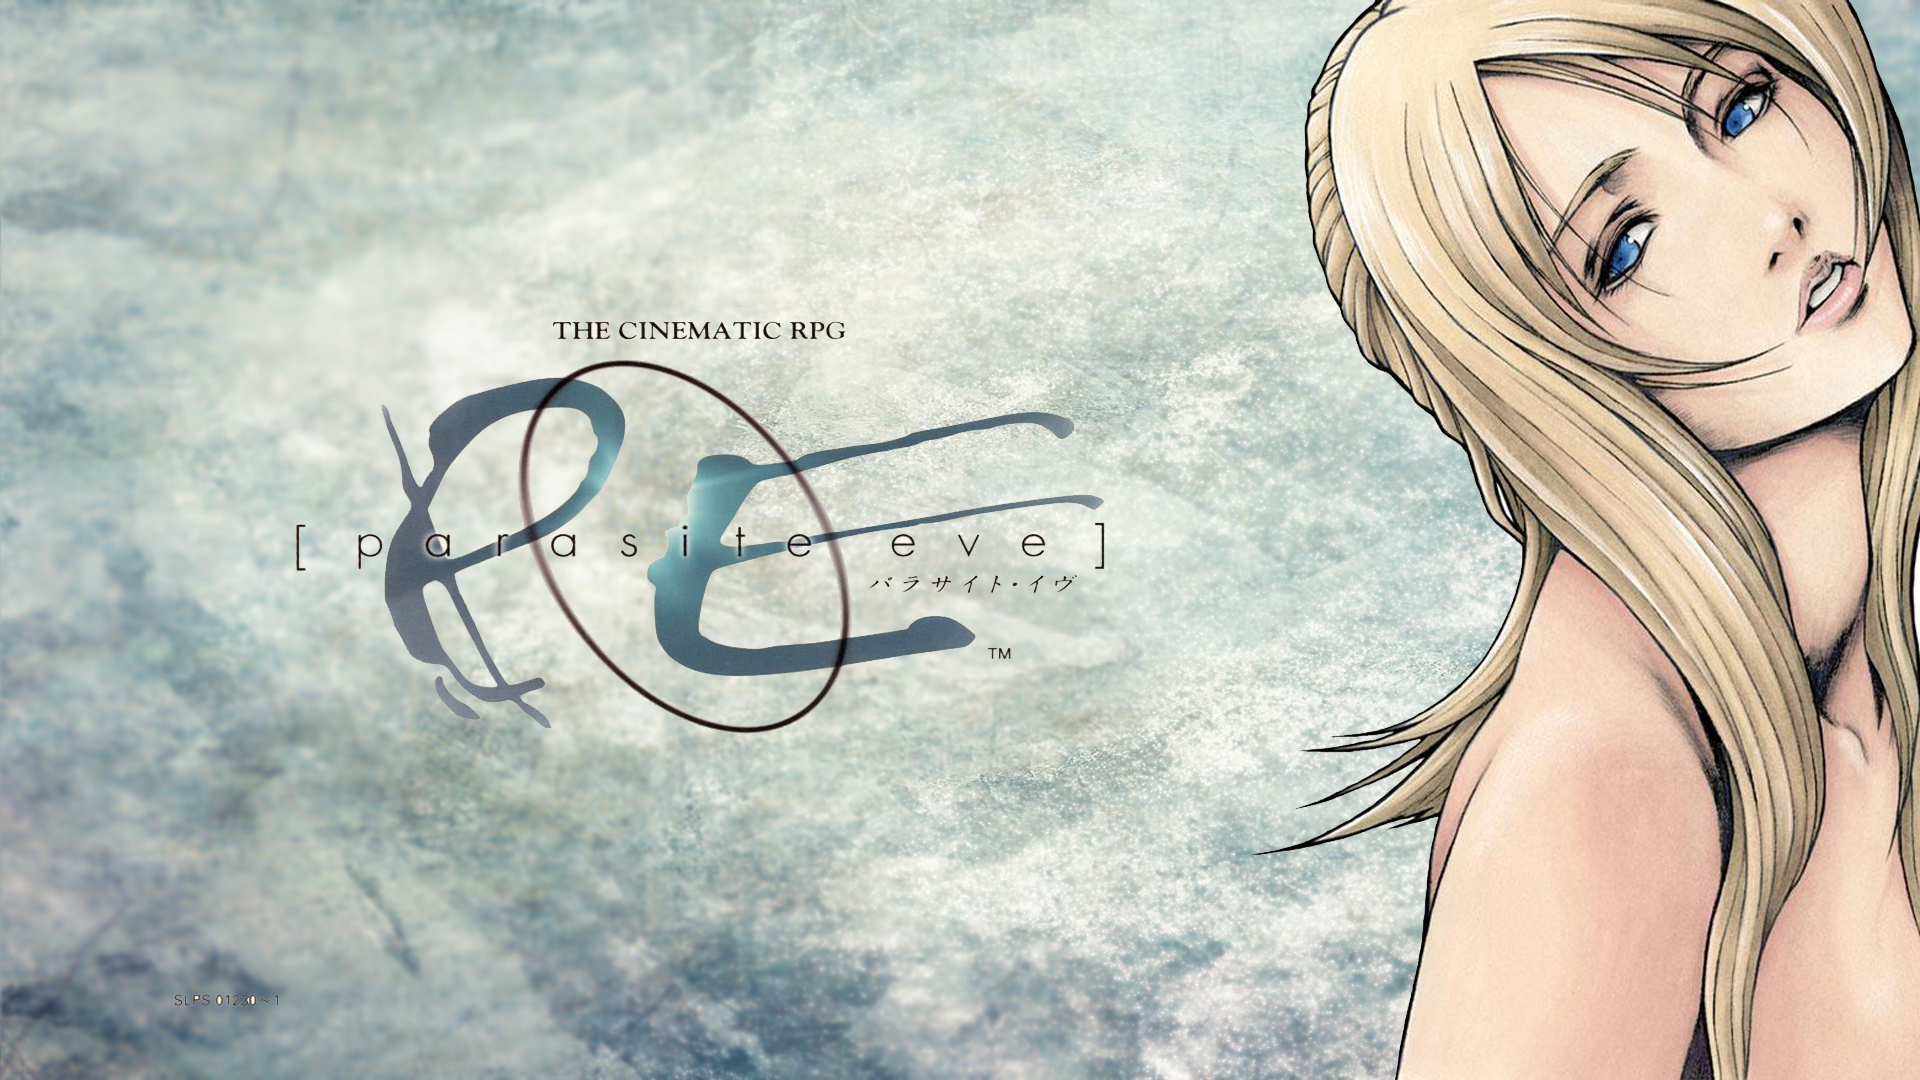 Free Download Parasite Eve Wallpaper By Tricky Clown V2 D4ncy3m 19x1080 For Your Desktop Mobile Tablet Explore 48 Parasite Eve 2 Wallpaper Parasite Eve 2 Wallpaper Parasite Eve Wallpaper Friday Eve Wallpaper